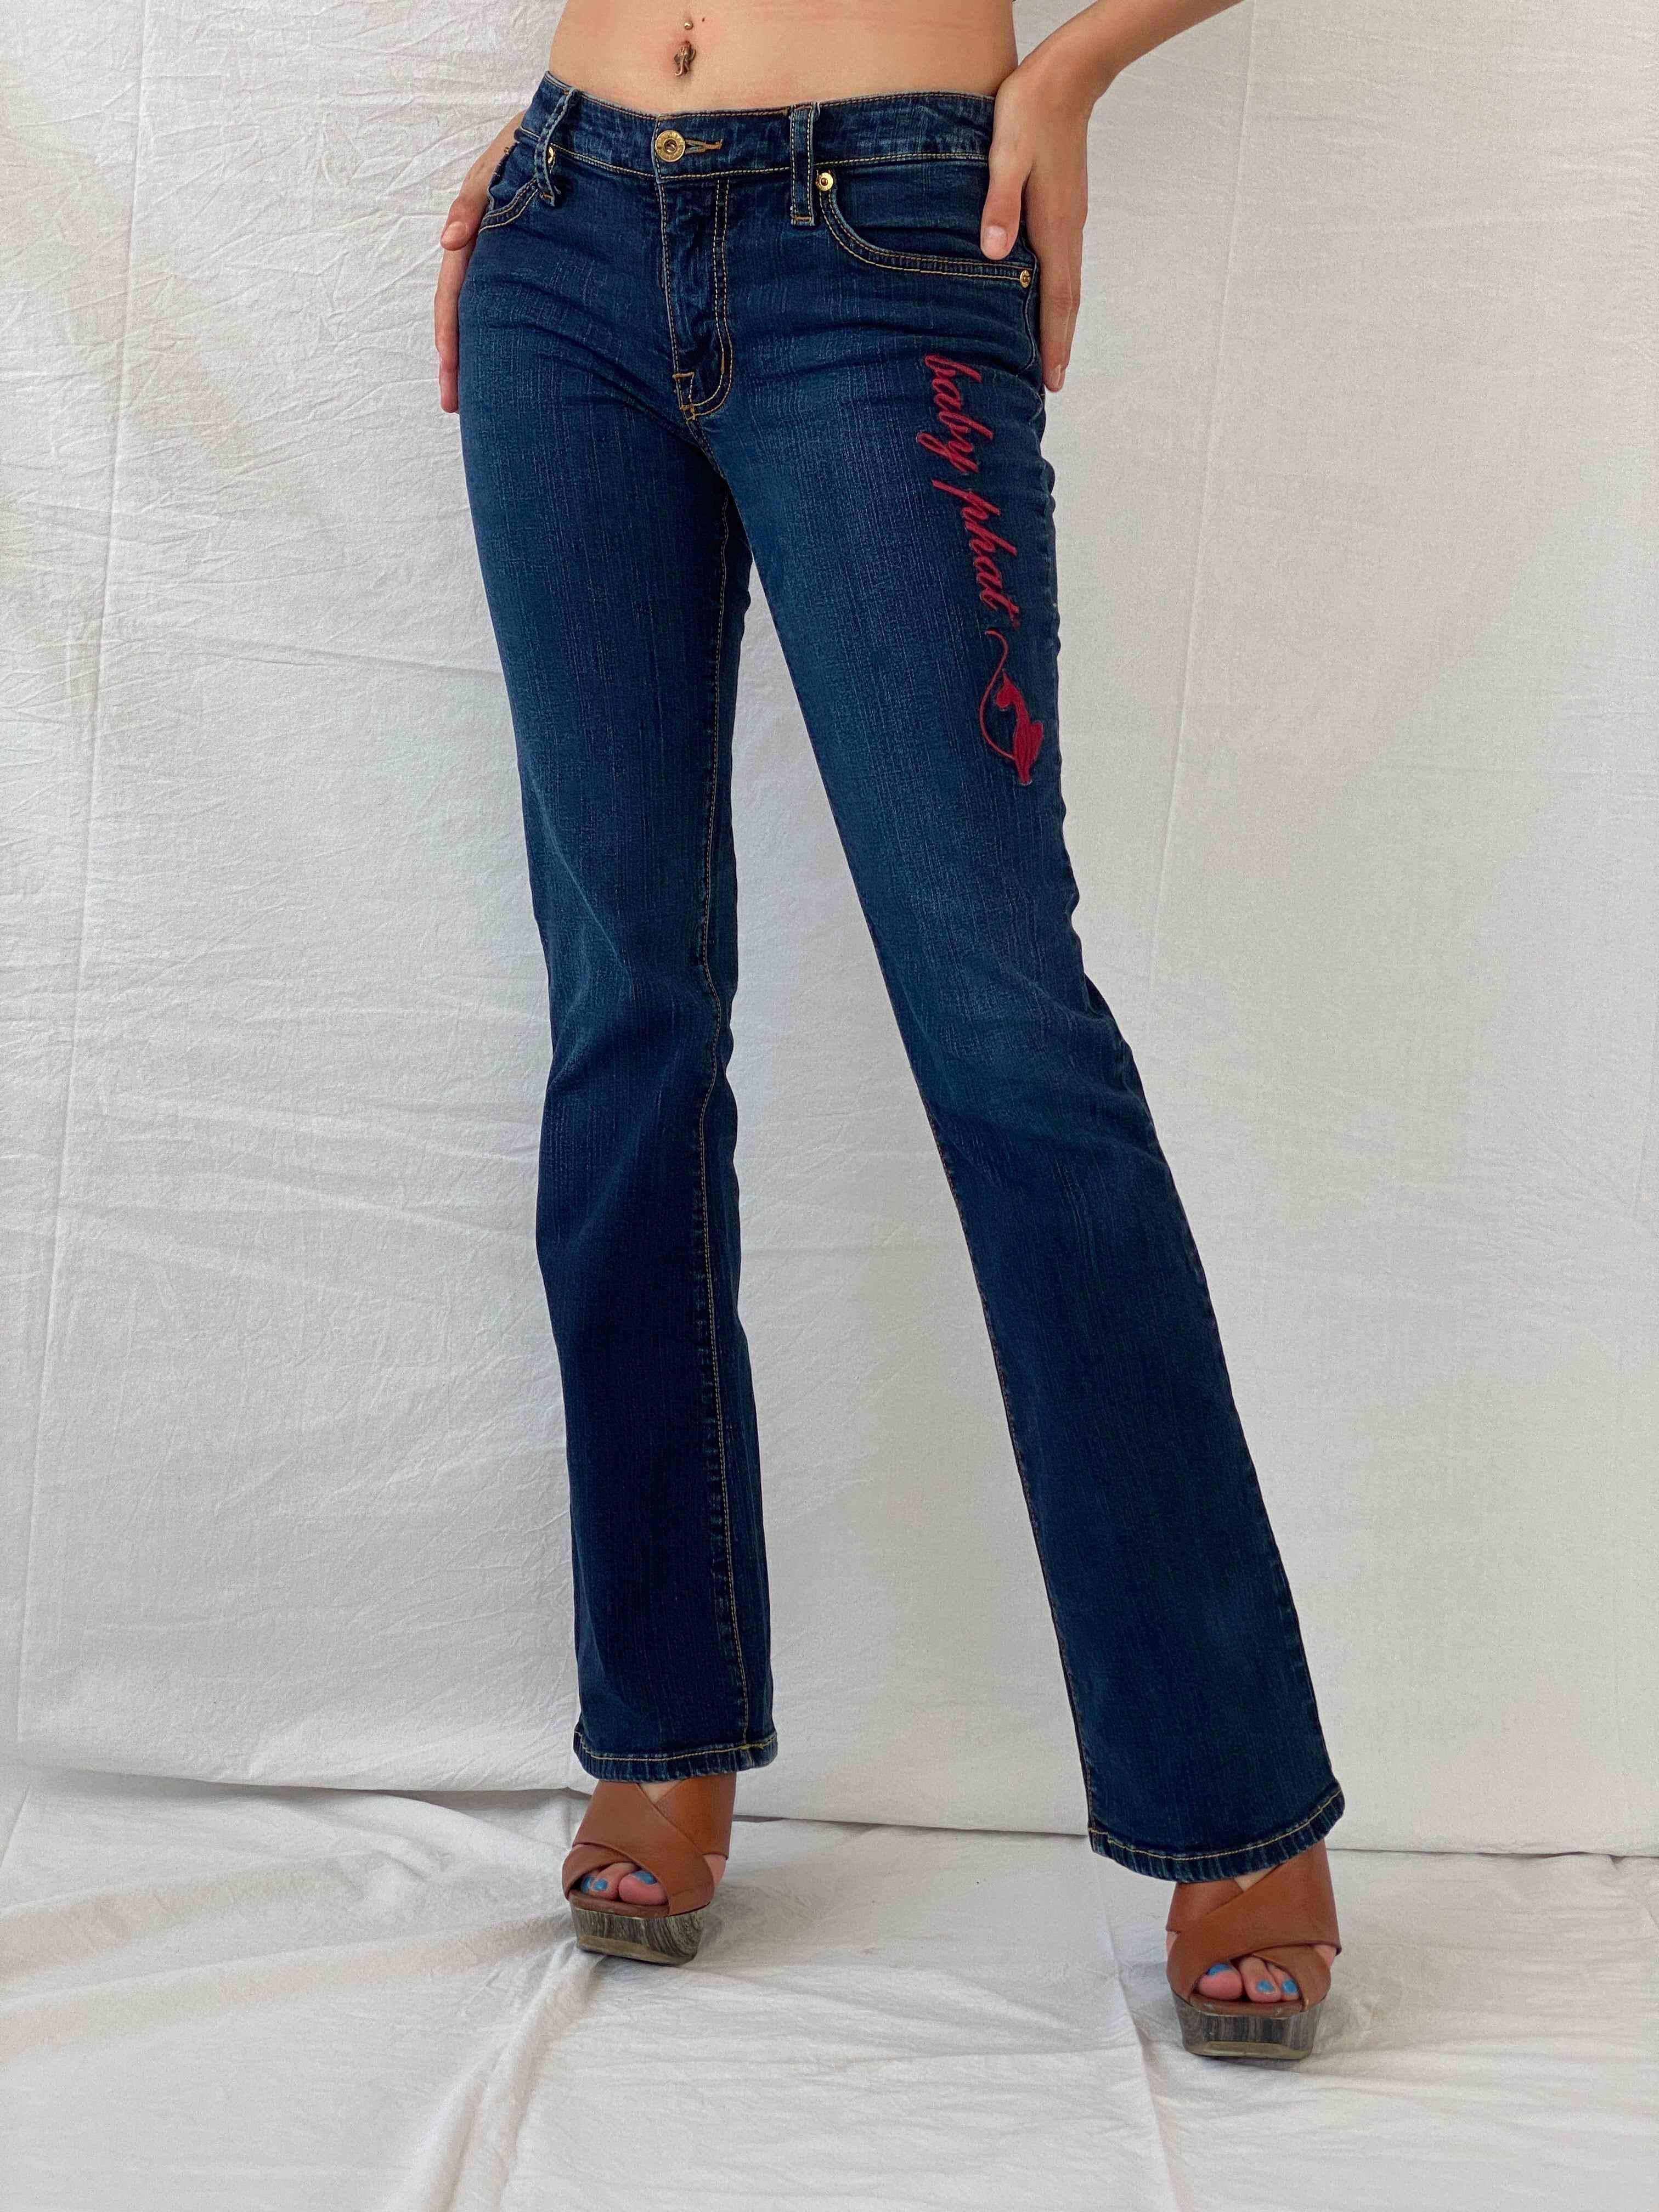 Y2K Low waisted Armani jeans - flare jeans - low rise - Armani